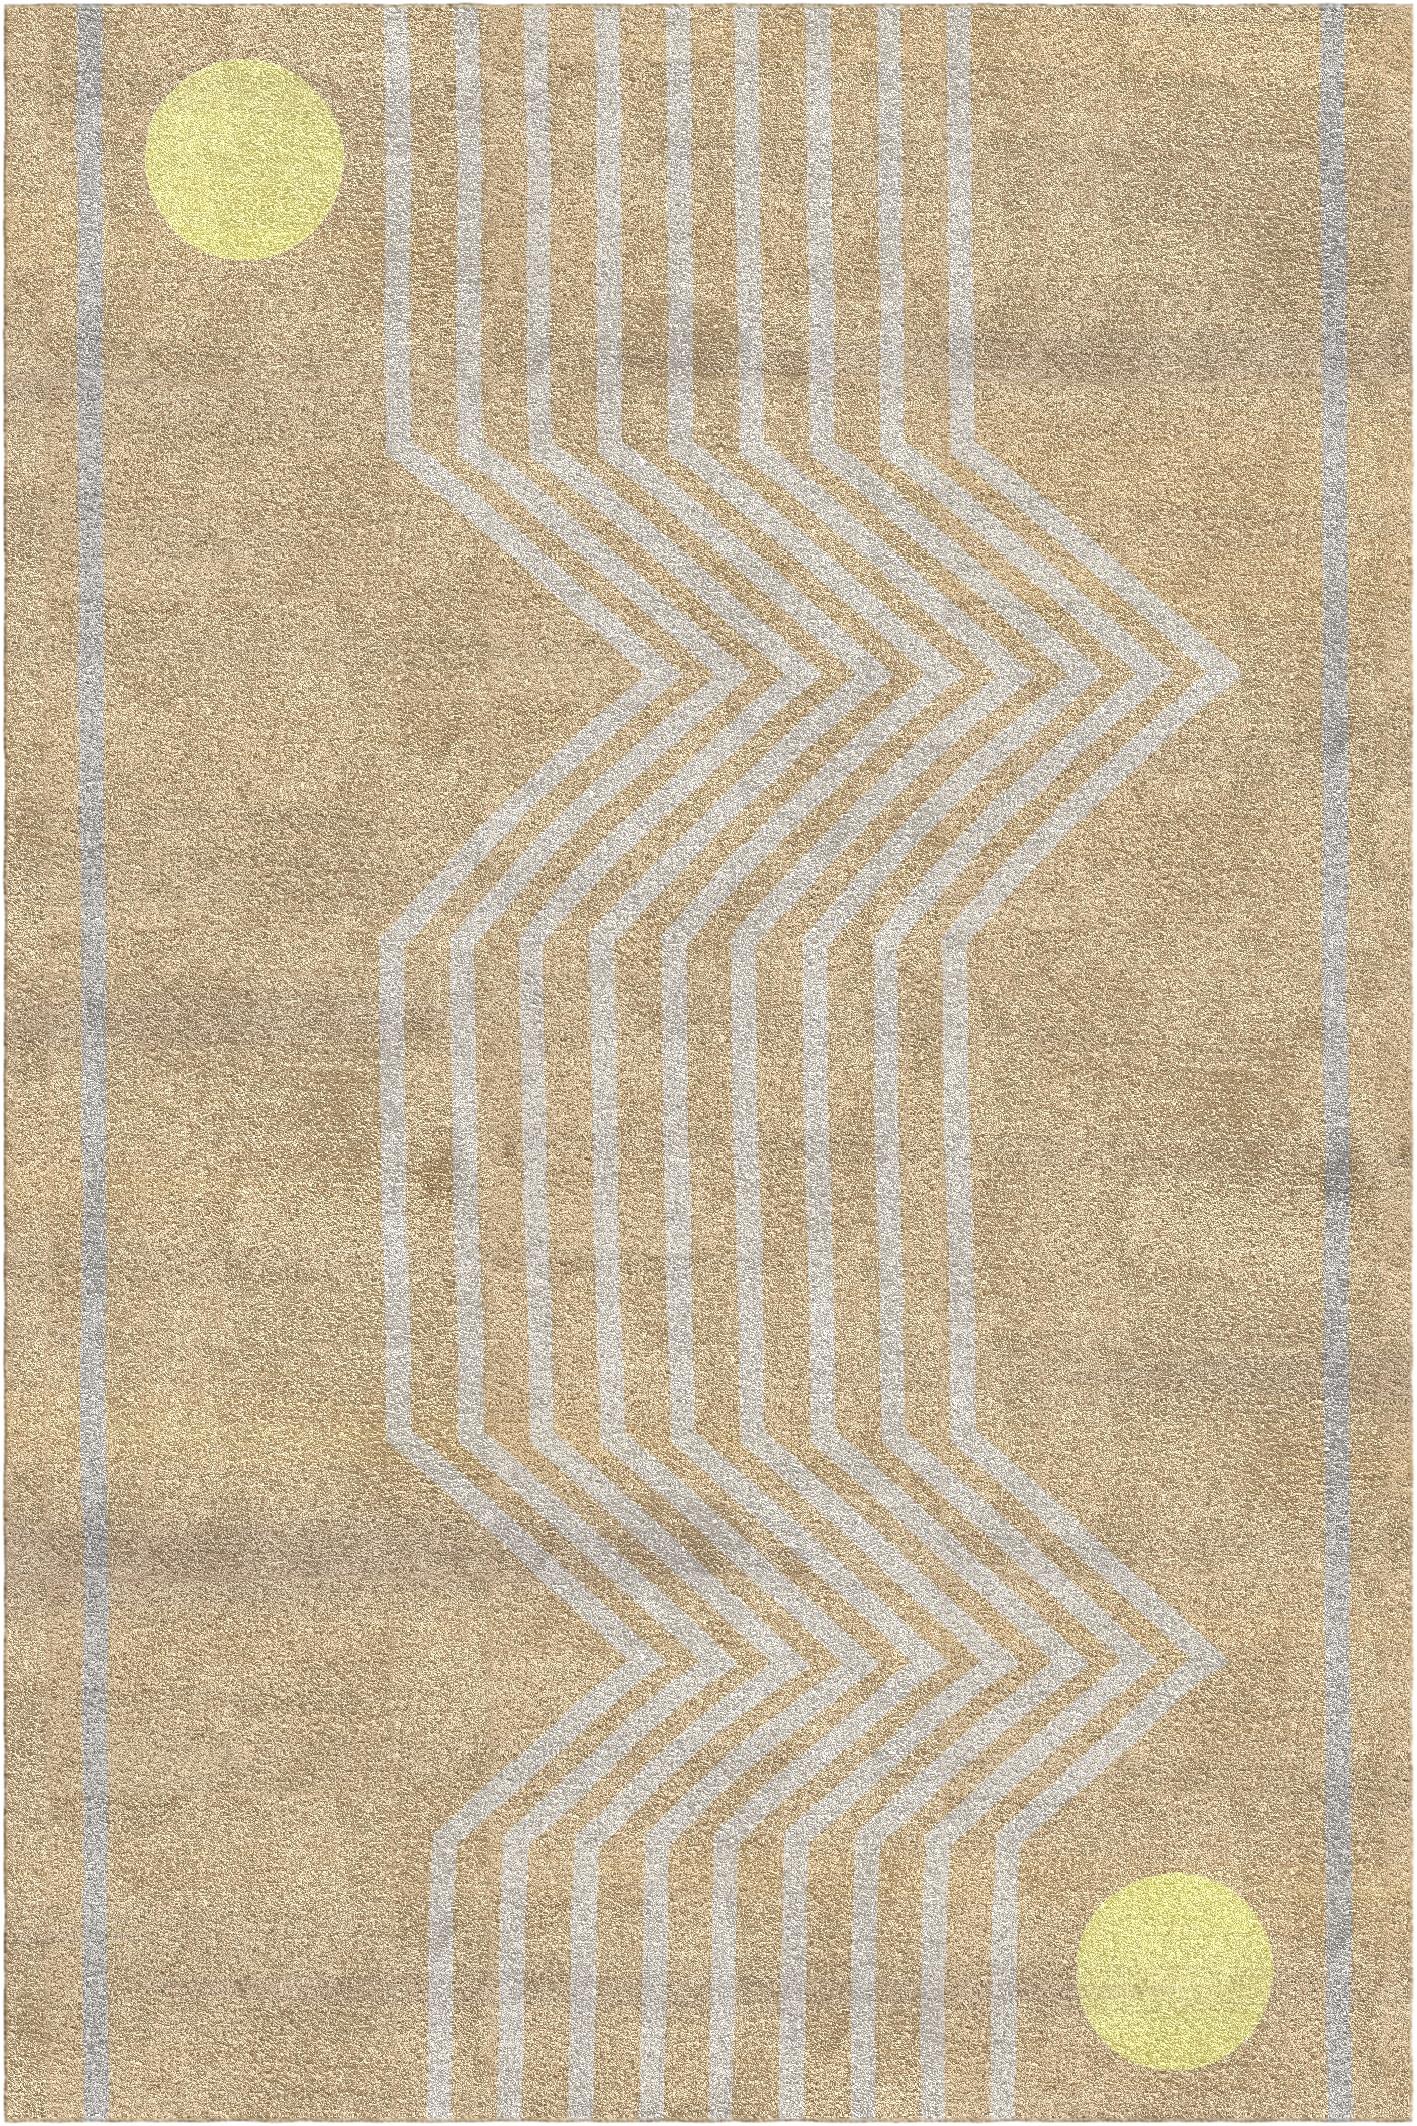 Hand-Crafted Futuro Rug III by Vanessa Ordoñez For Sale